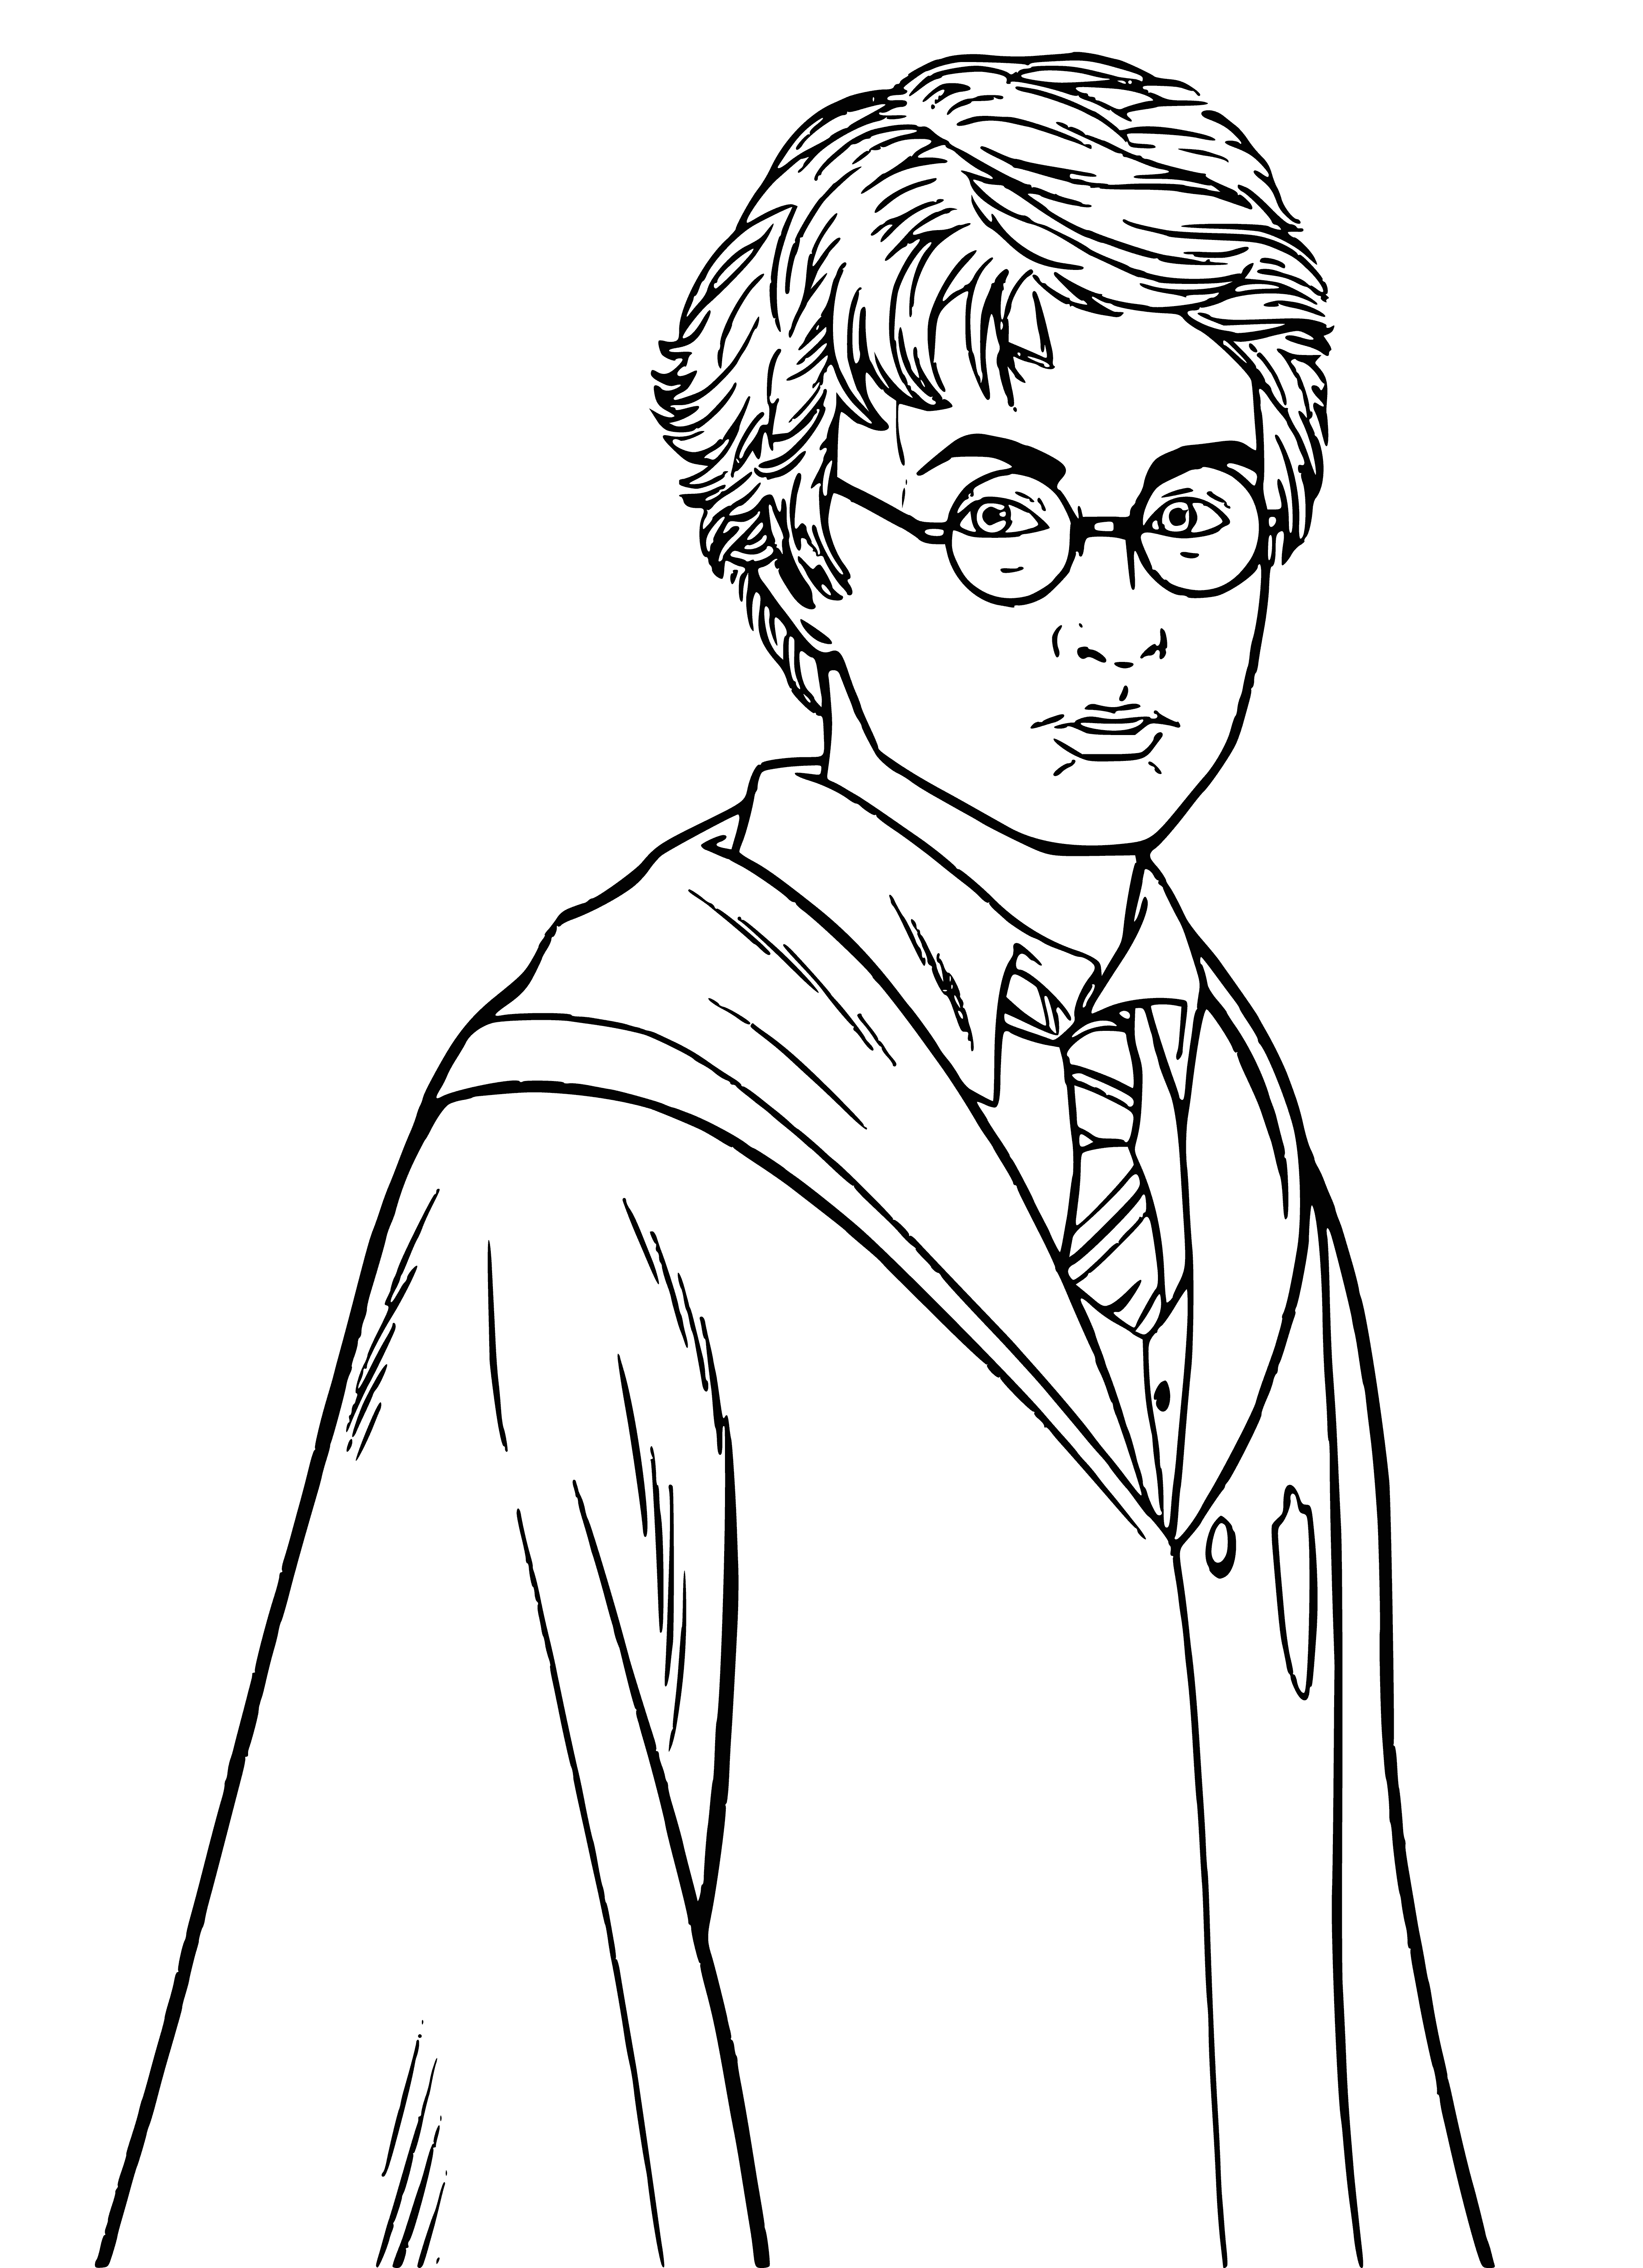 Harry Potter coloring page